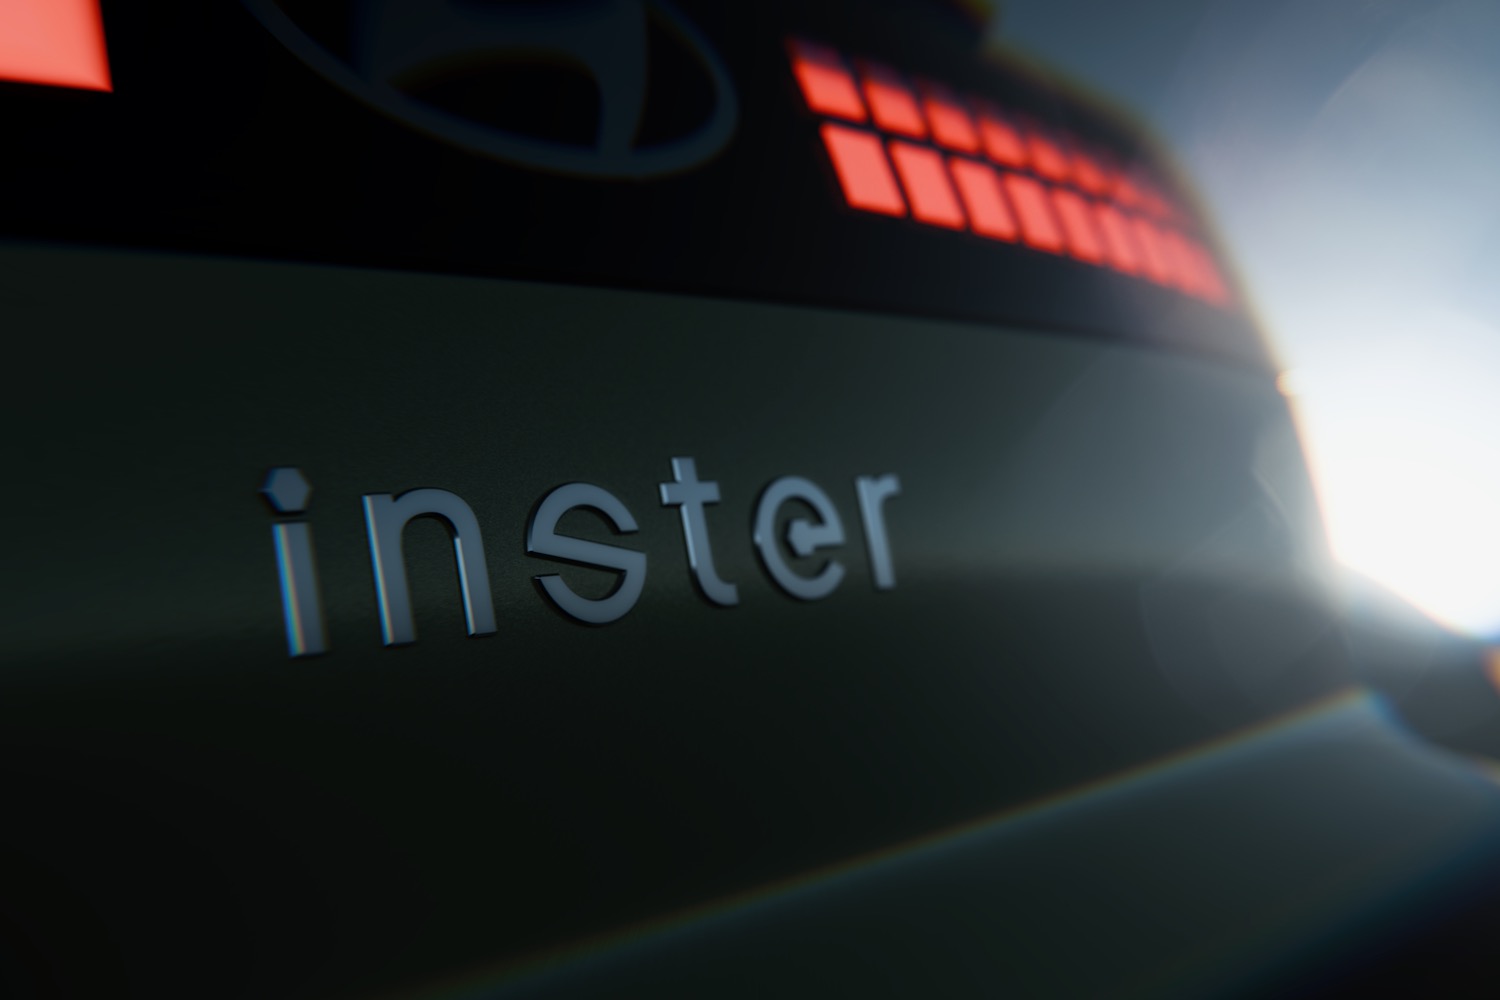 Teaser image showing the badge and taillights of the Hyundai Inster.